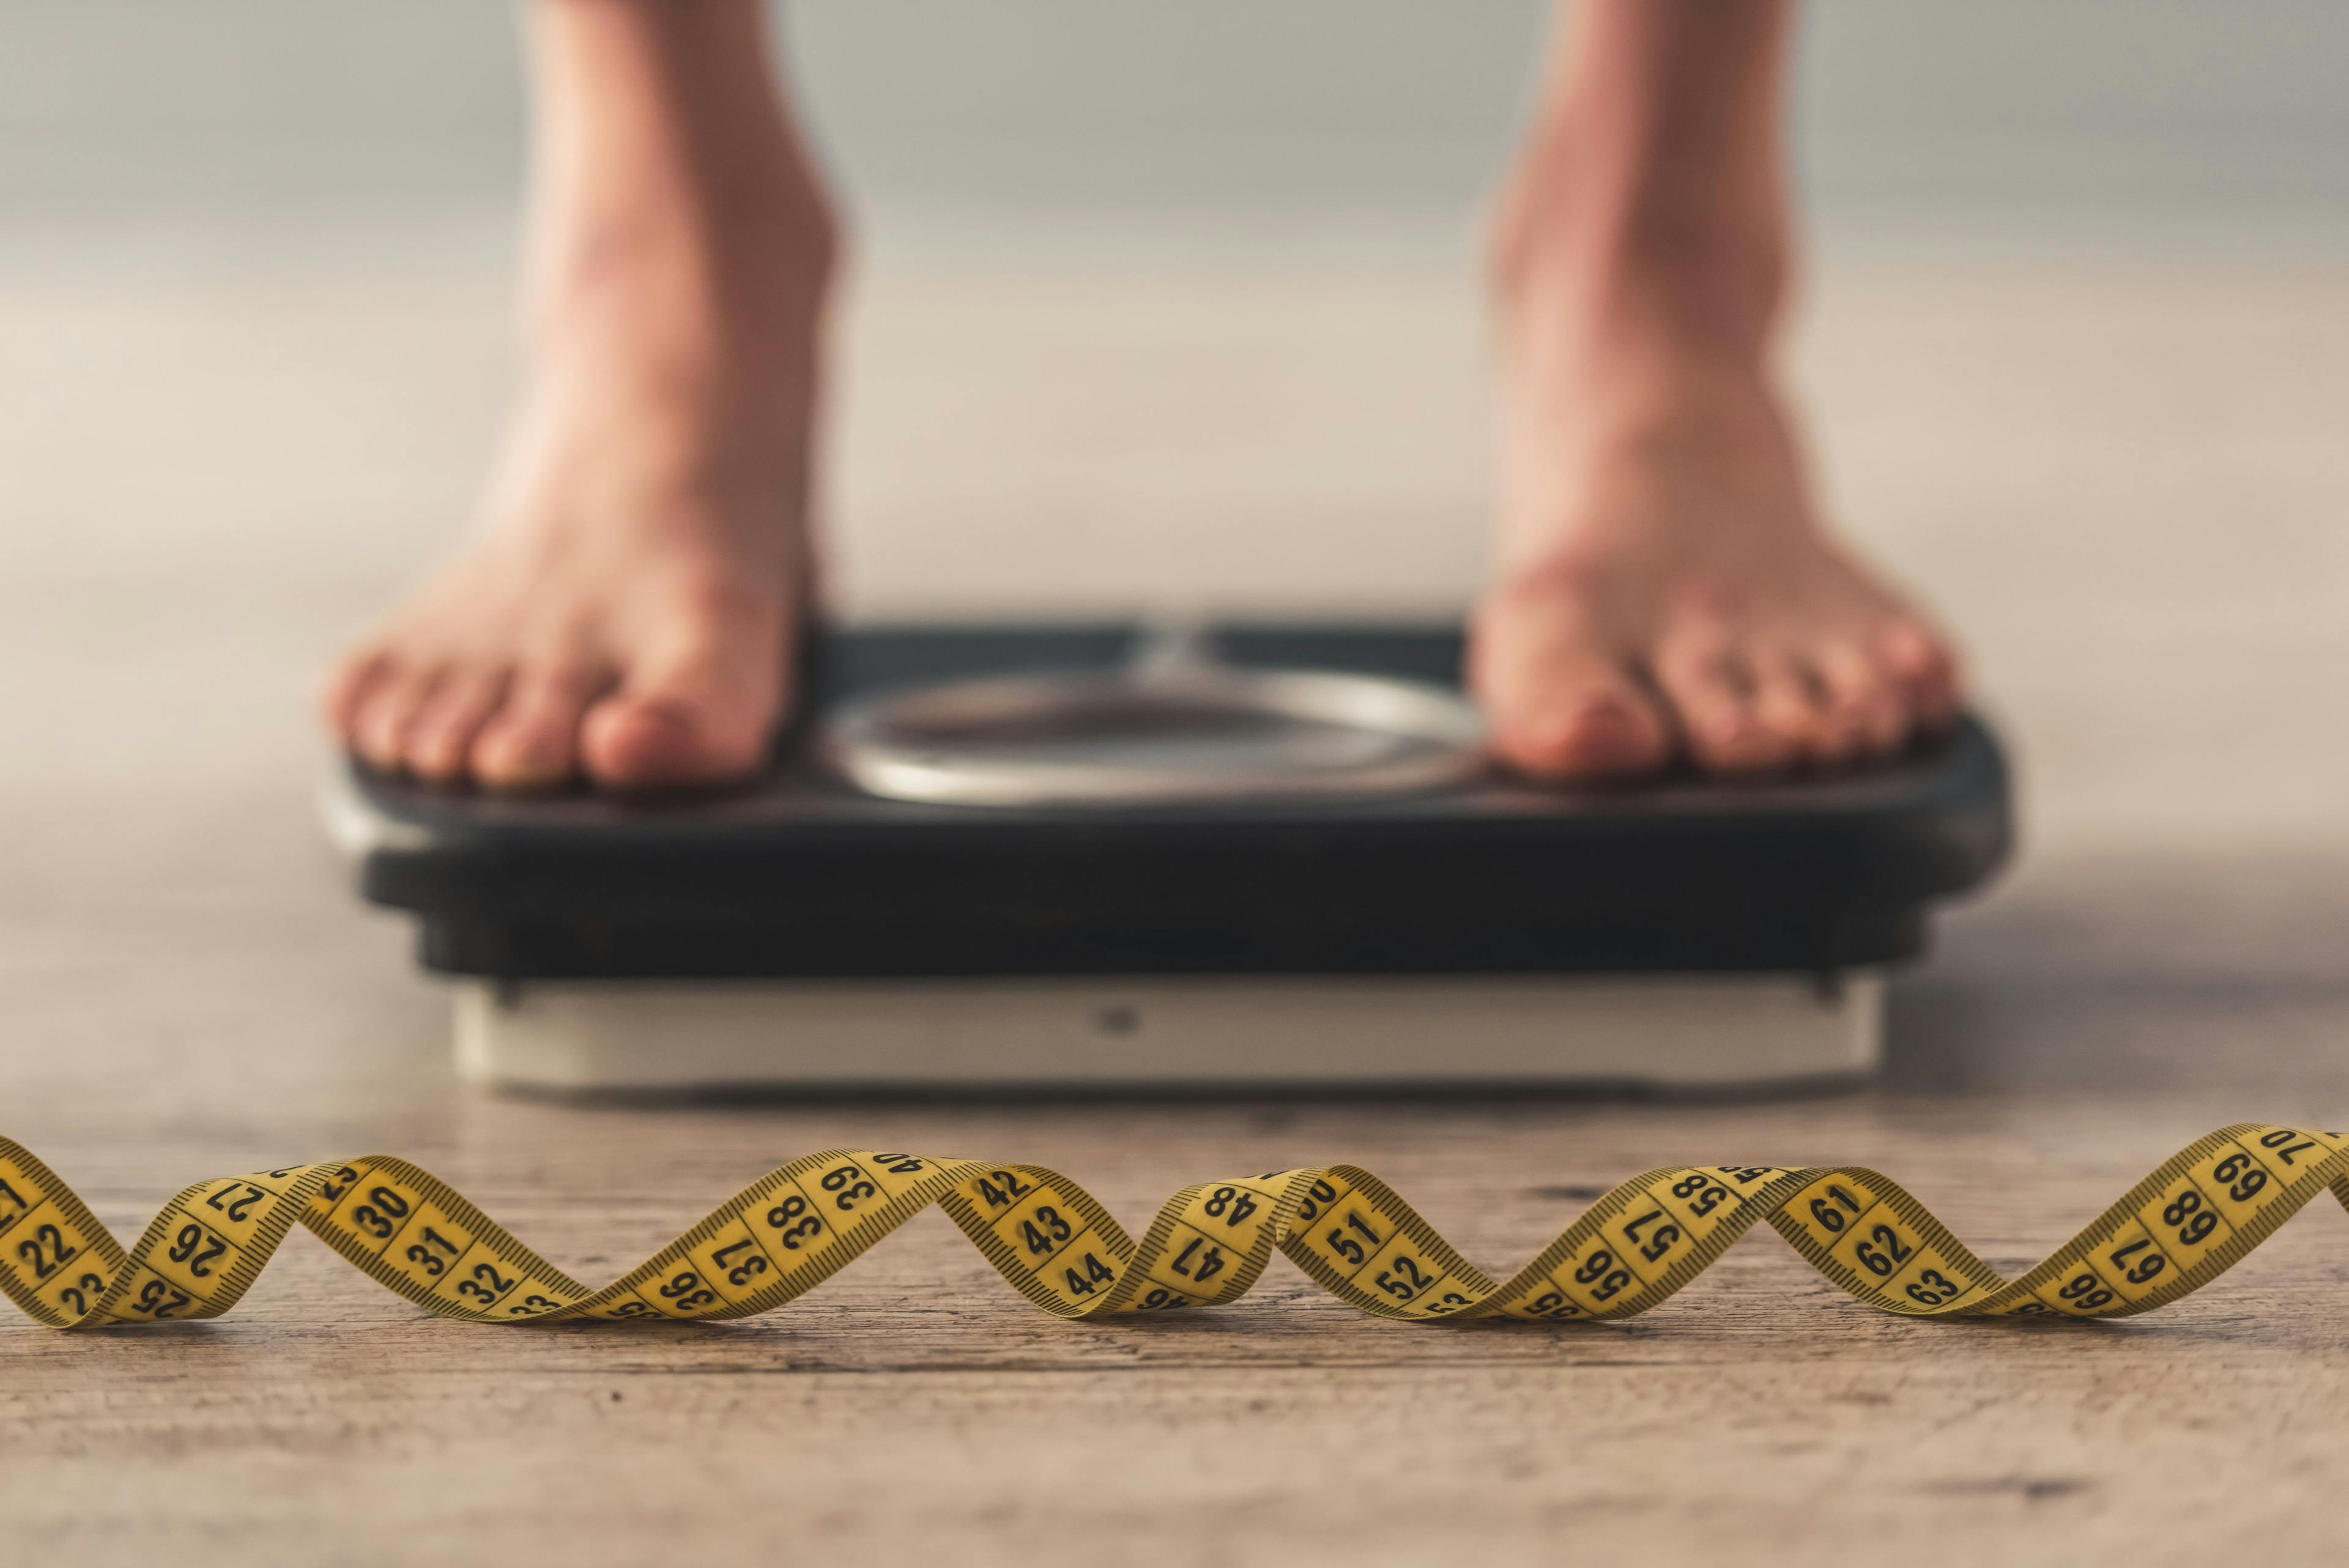 CDC: Adult Obesity Rising, Racial and Ethnic Disparities Still Exist